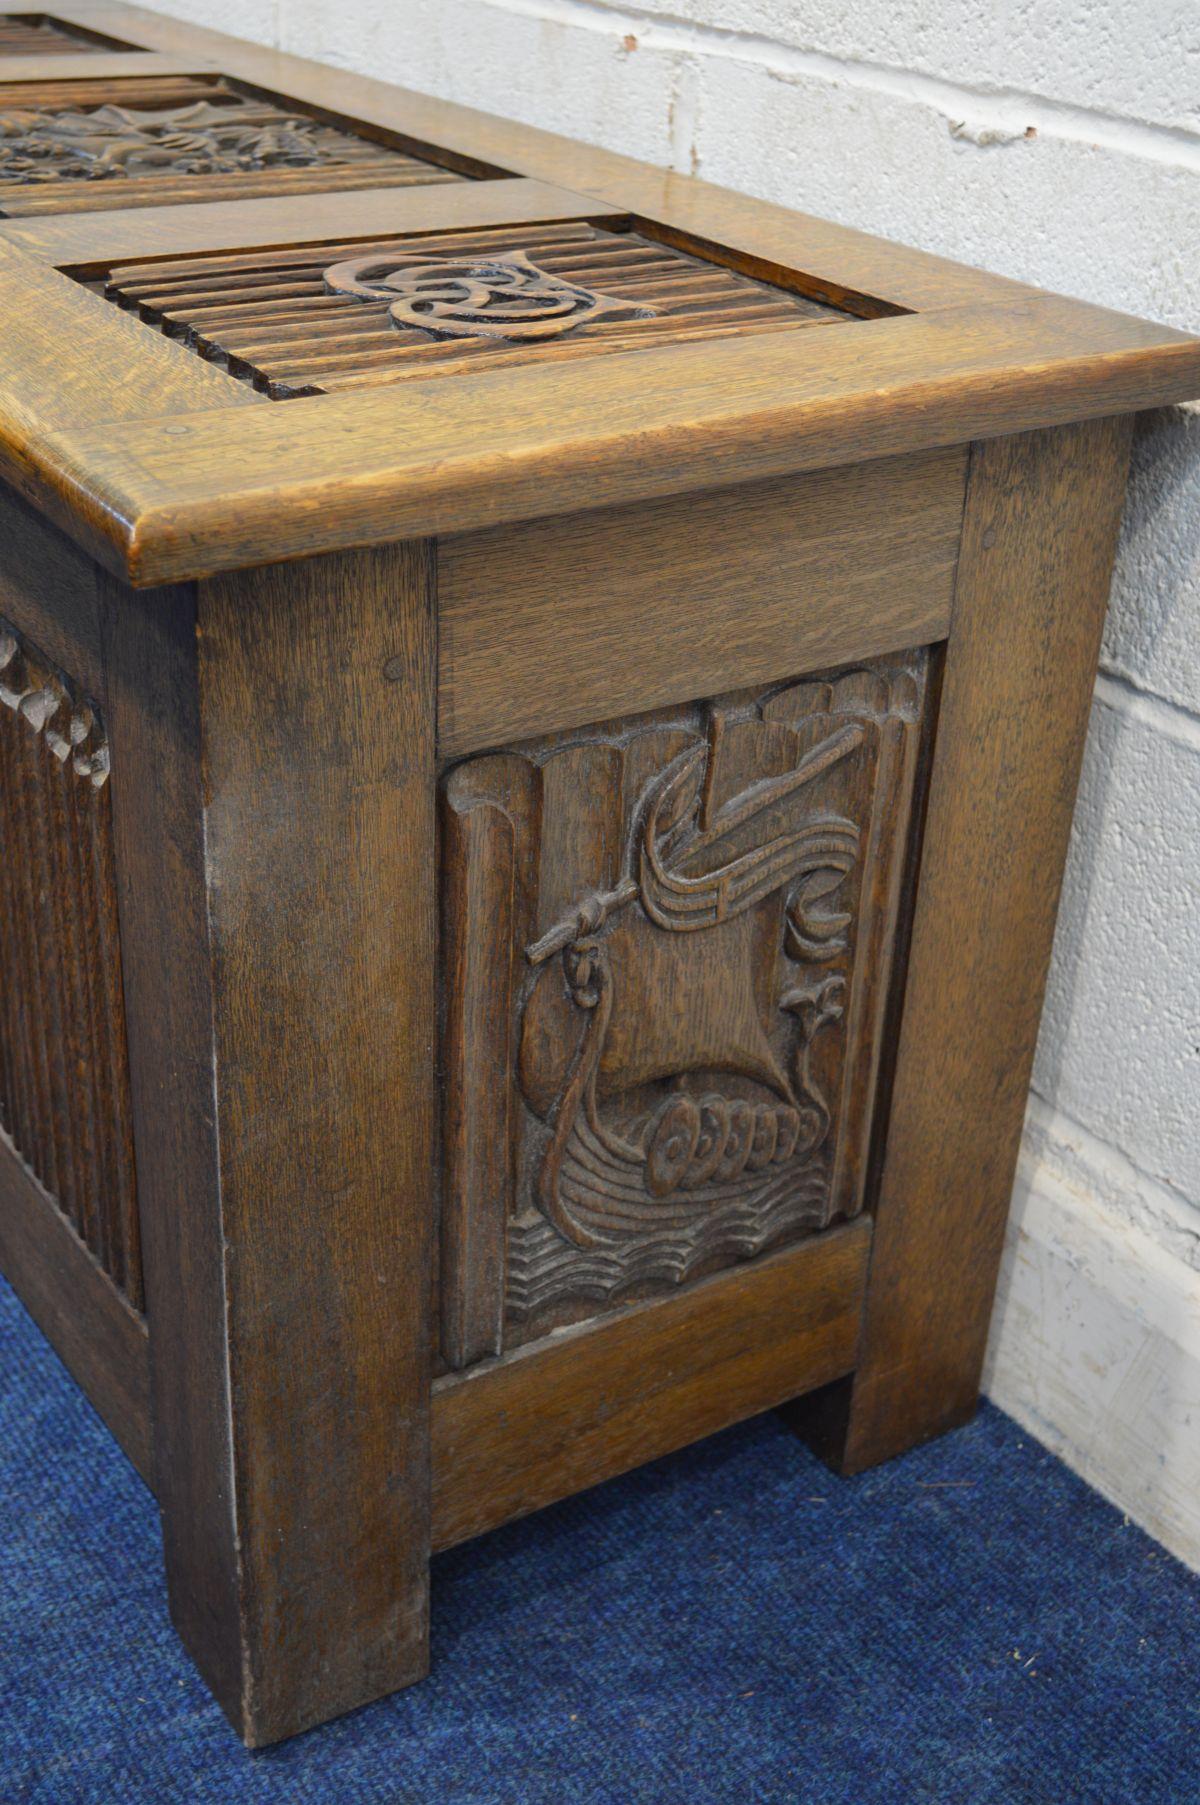 Hand-Carved Arts & Crafts Oak Blanket Chest Carved with King Neptune King Fish of the Sea